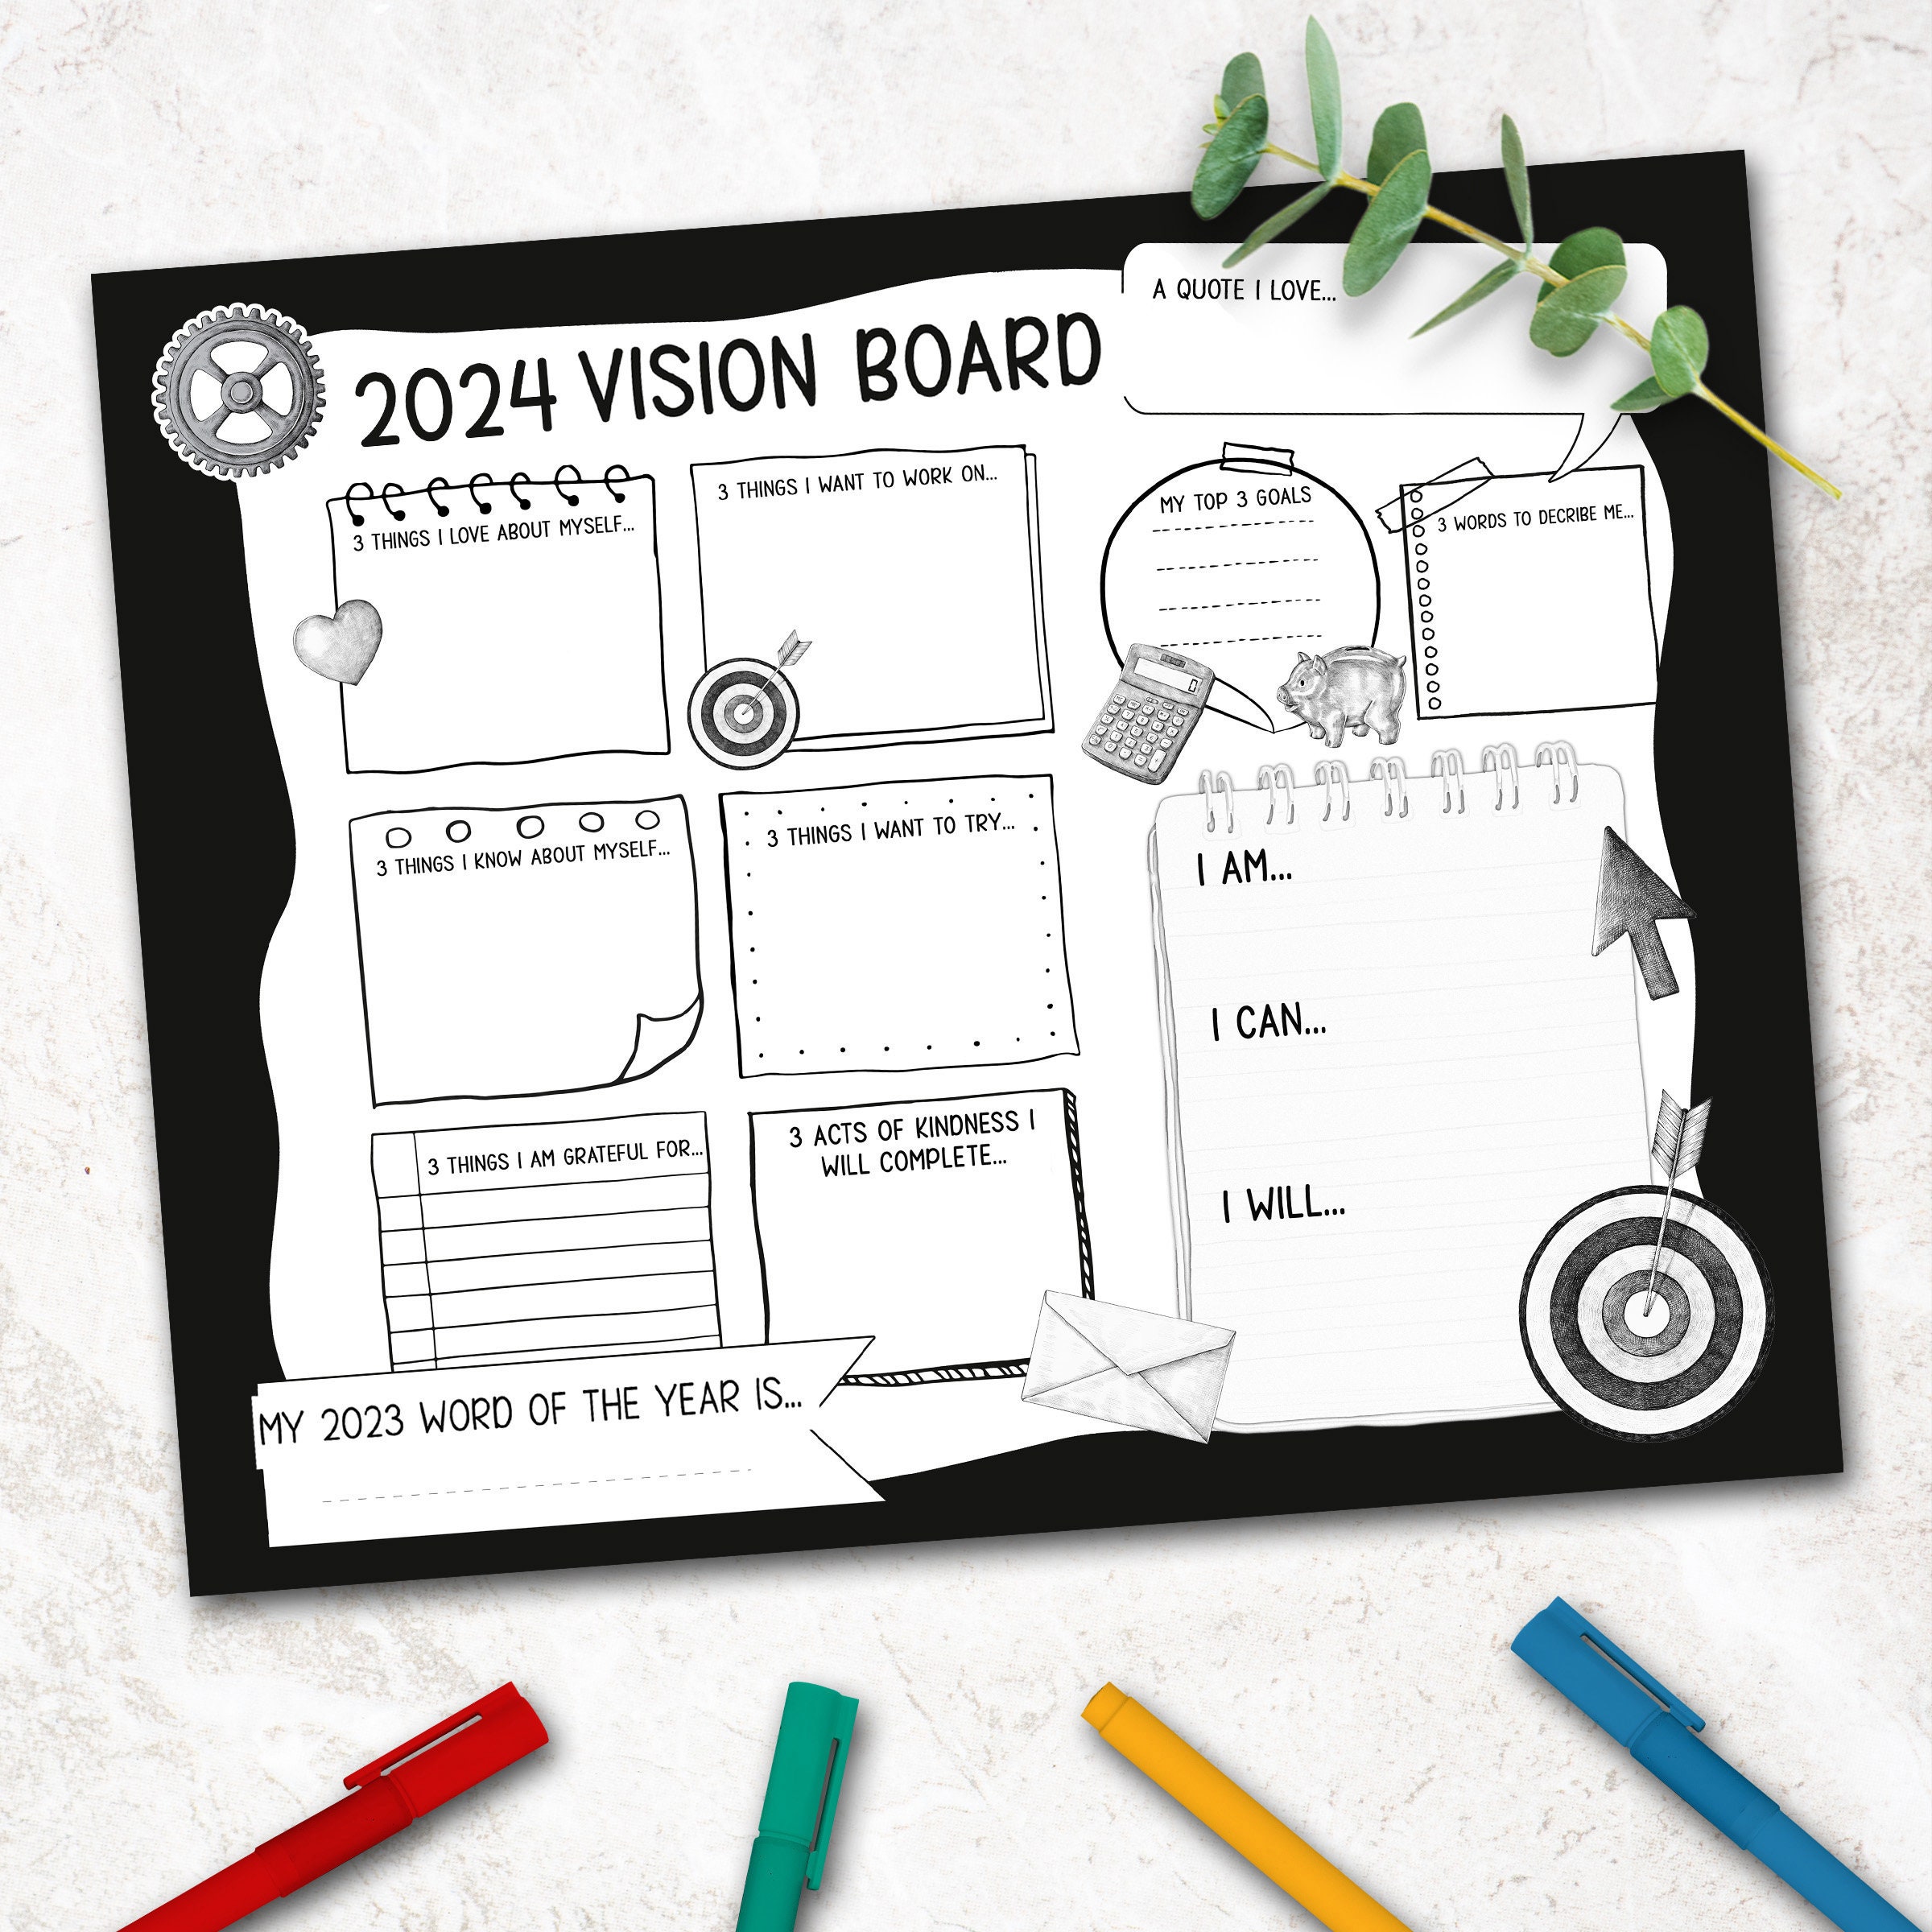 2024 Vision Board Clip Art Book: An Extensive Collection of Inspiring Images Quotes & Affirmations for Personal Growth Goal Setting and & Wor